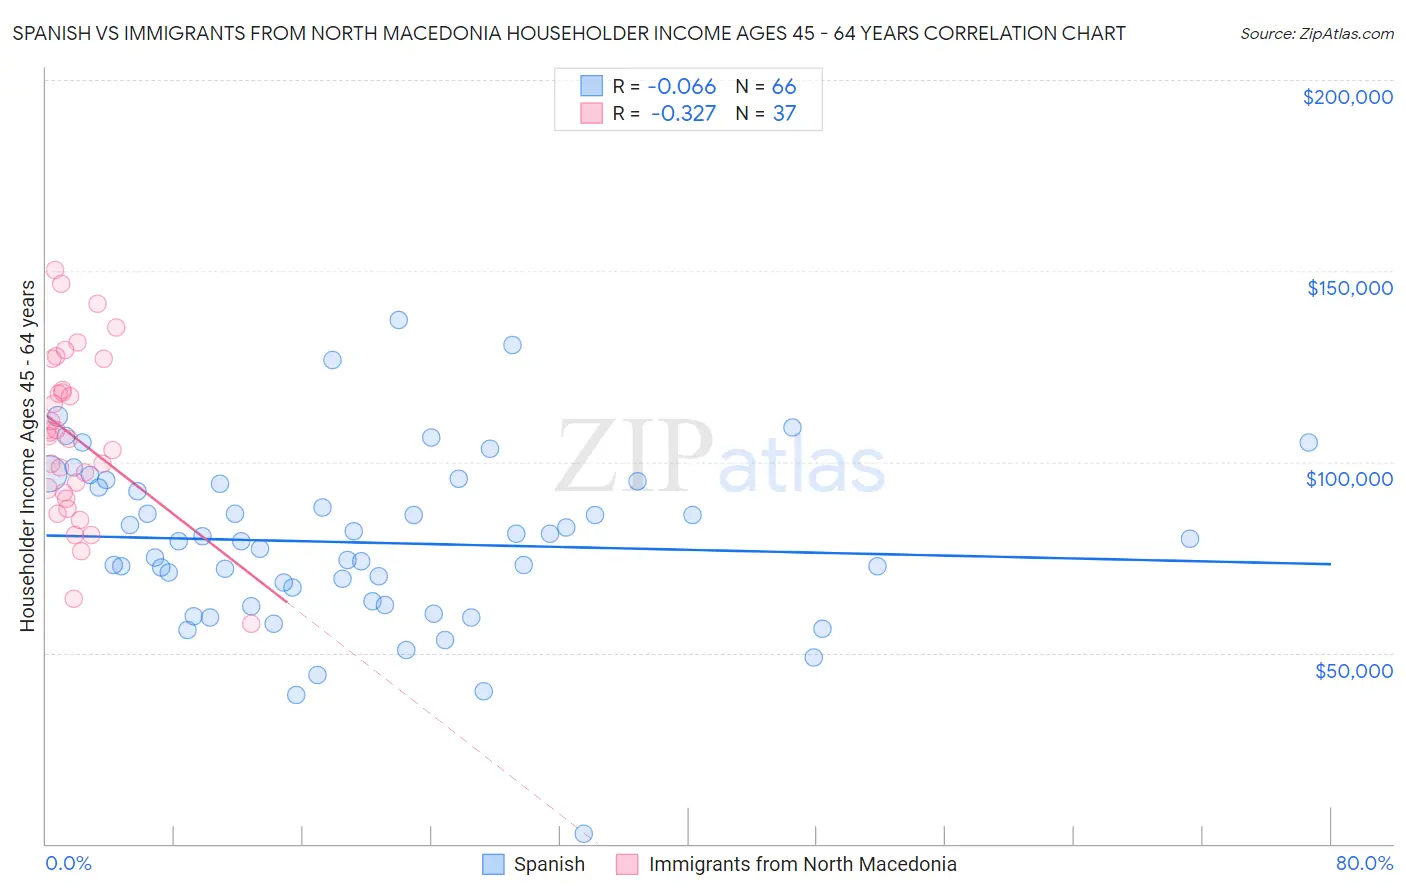 Spanish vs Immigrants from North Macedonia Householder Income Ages 45 - 64 years